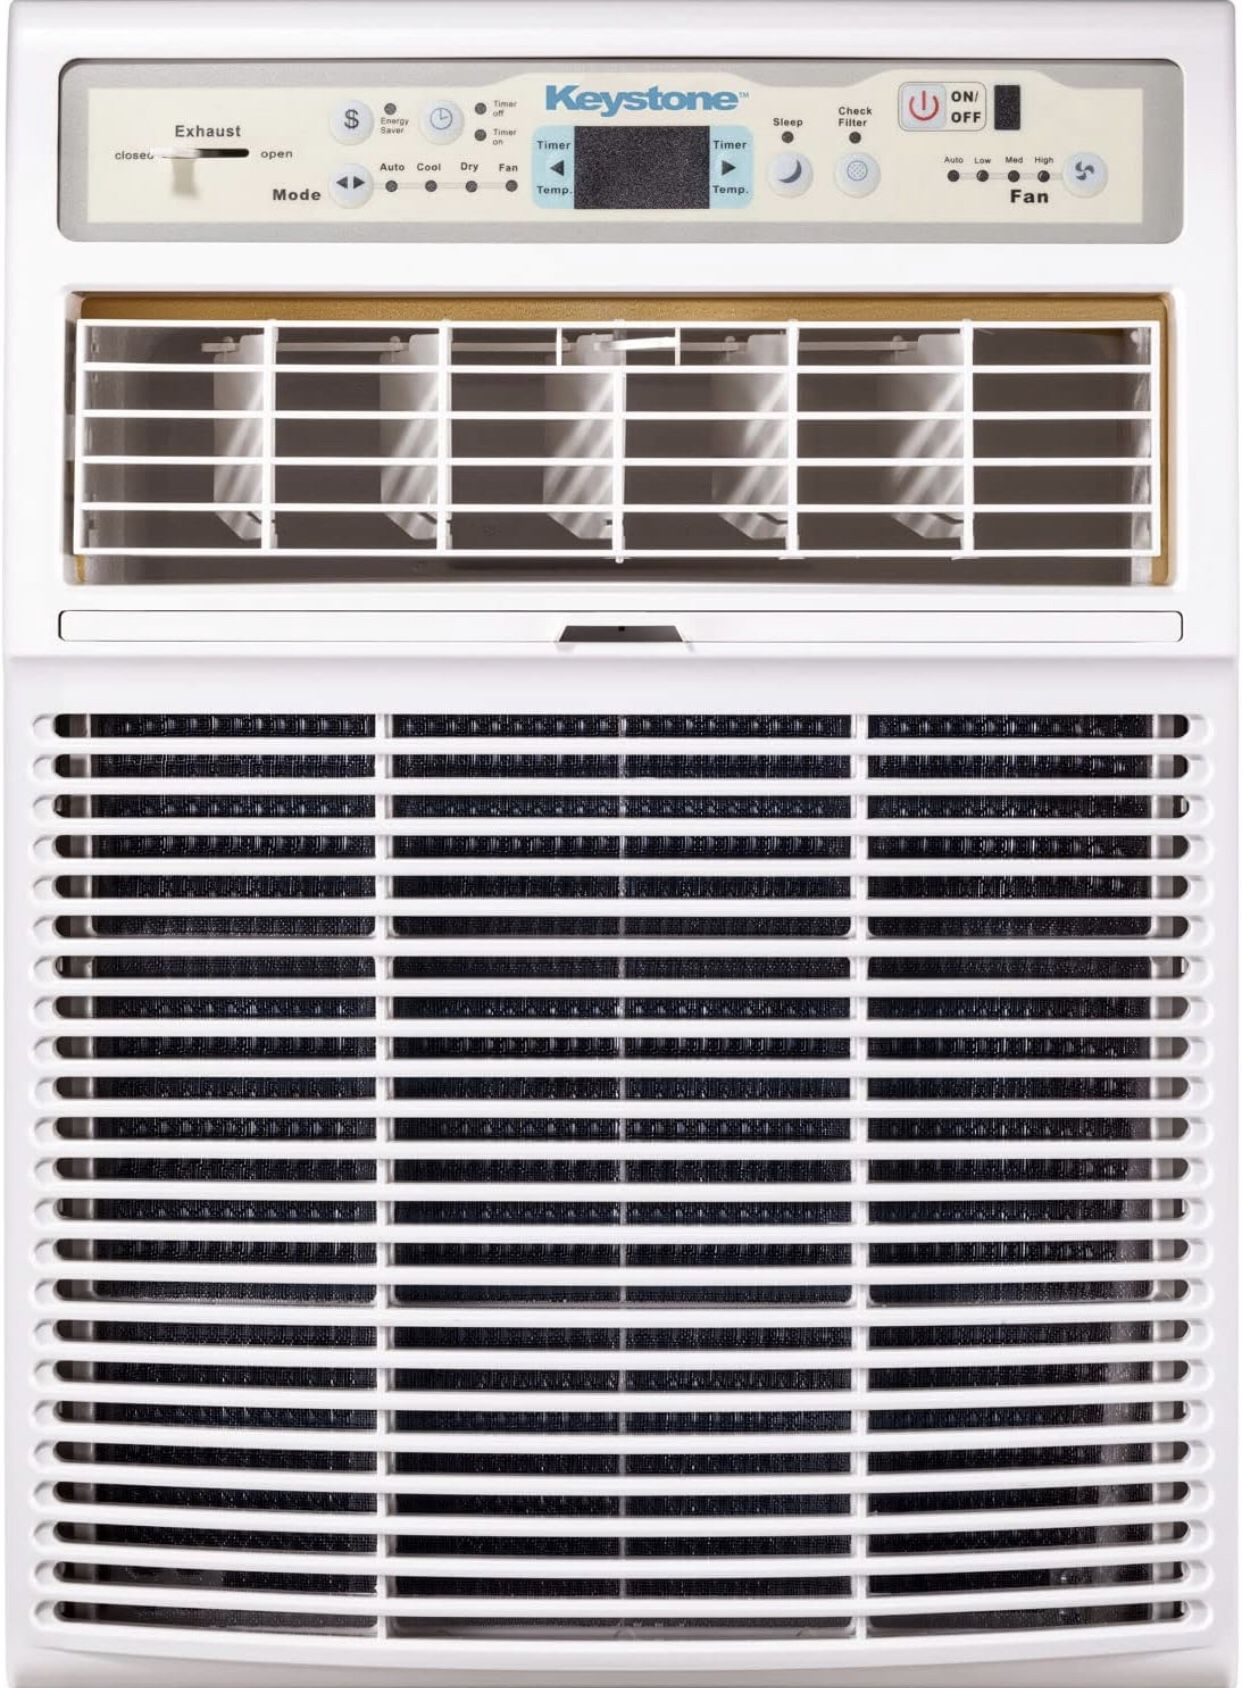 Keystone 10,000 BTU Slider Casement Window-Wall Air Conditioner and Dehumidifier with 4-Way Air Direction Control, Window AC Unit for Bedroom, Living 